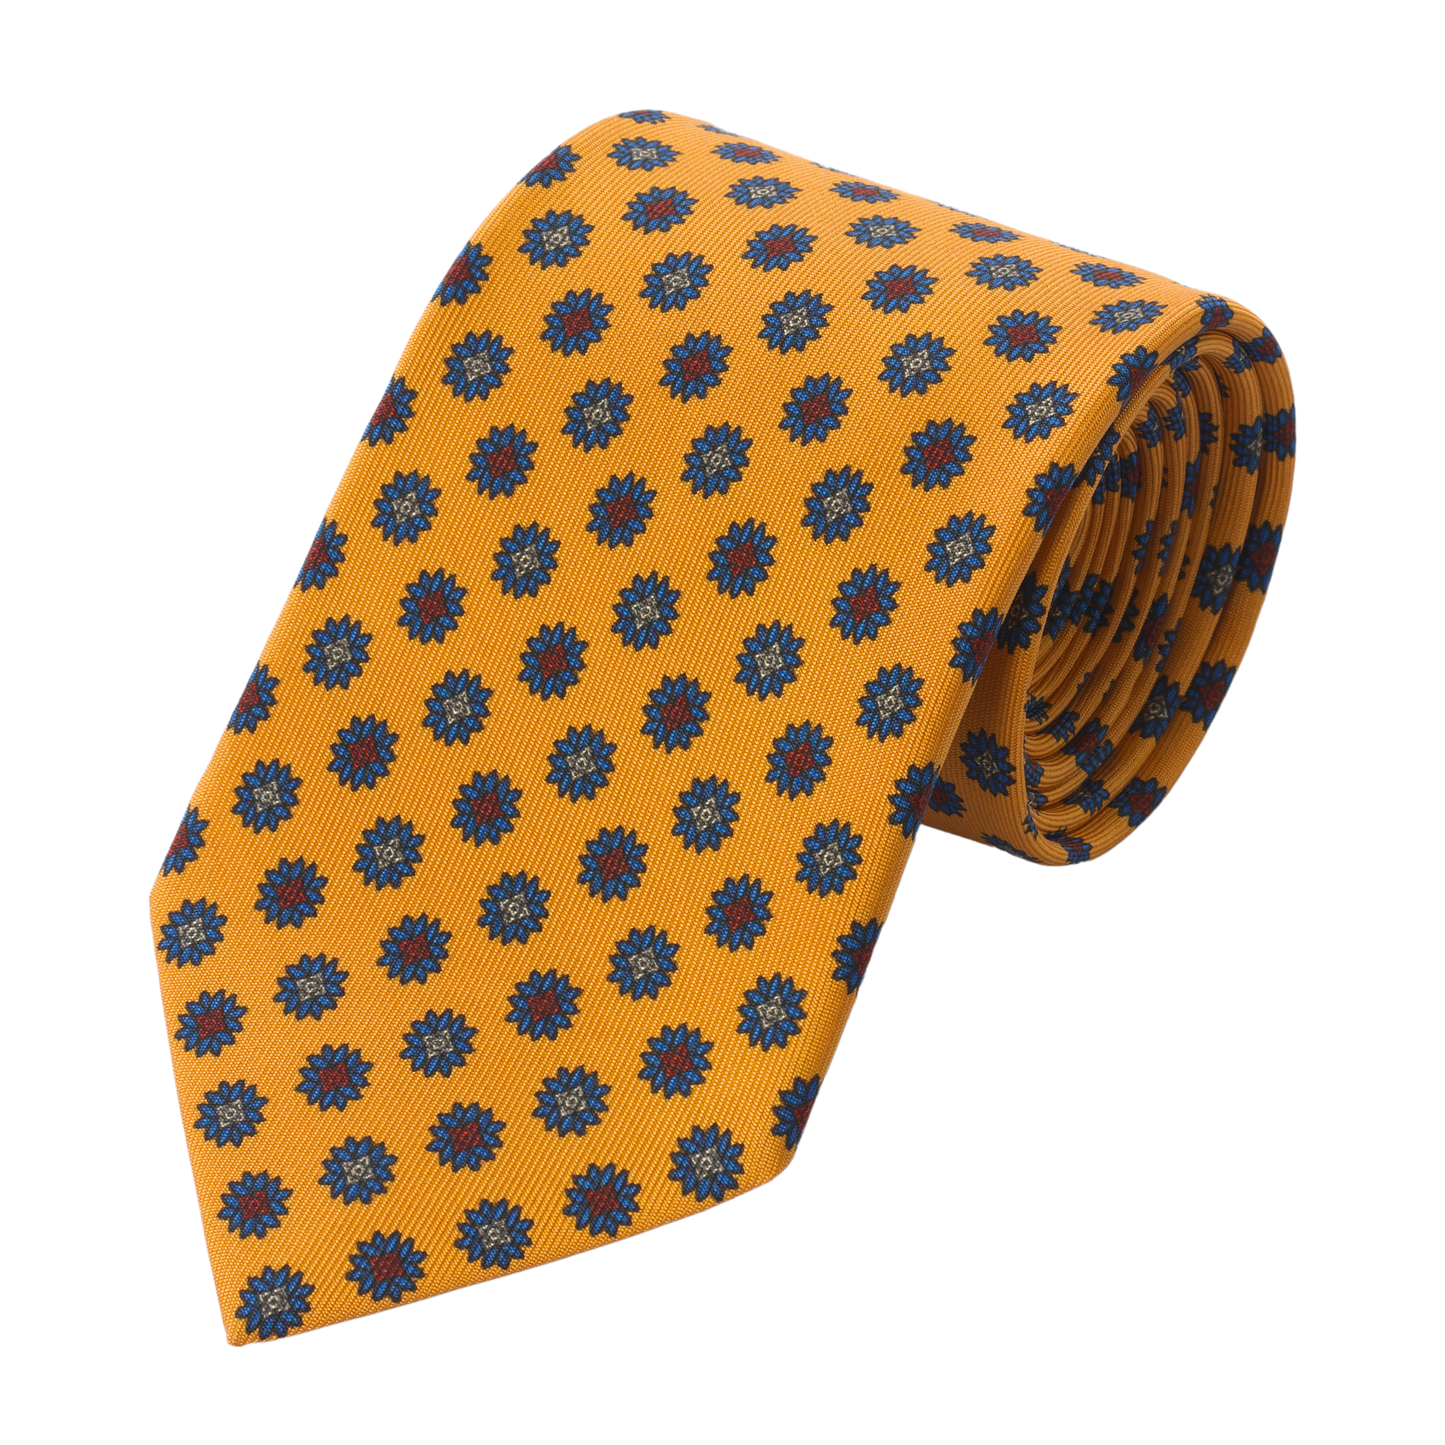 Silk Printed Yellow Tie with Design